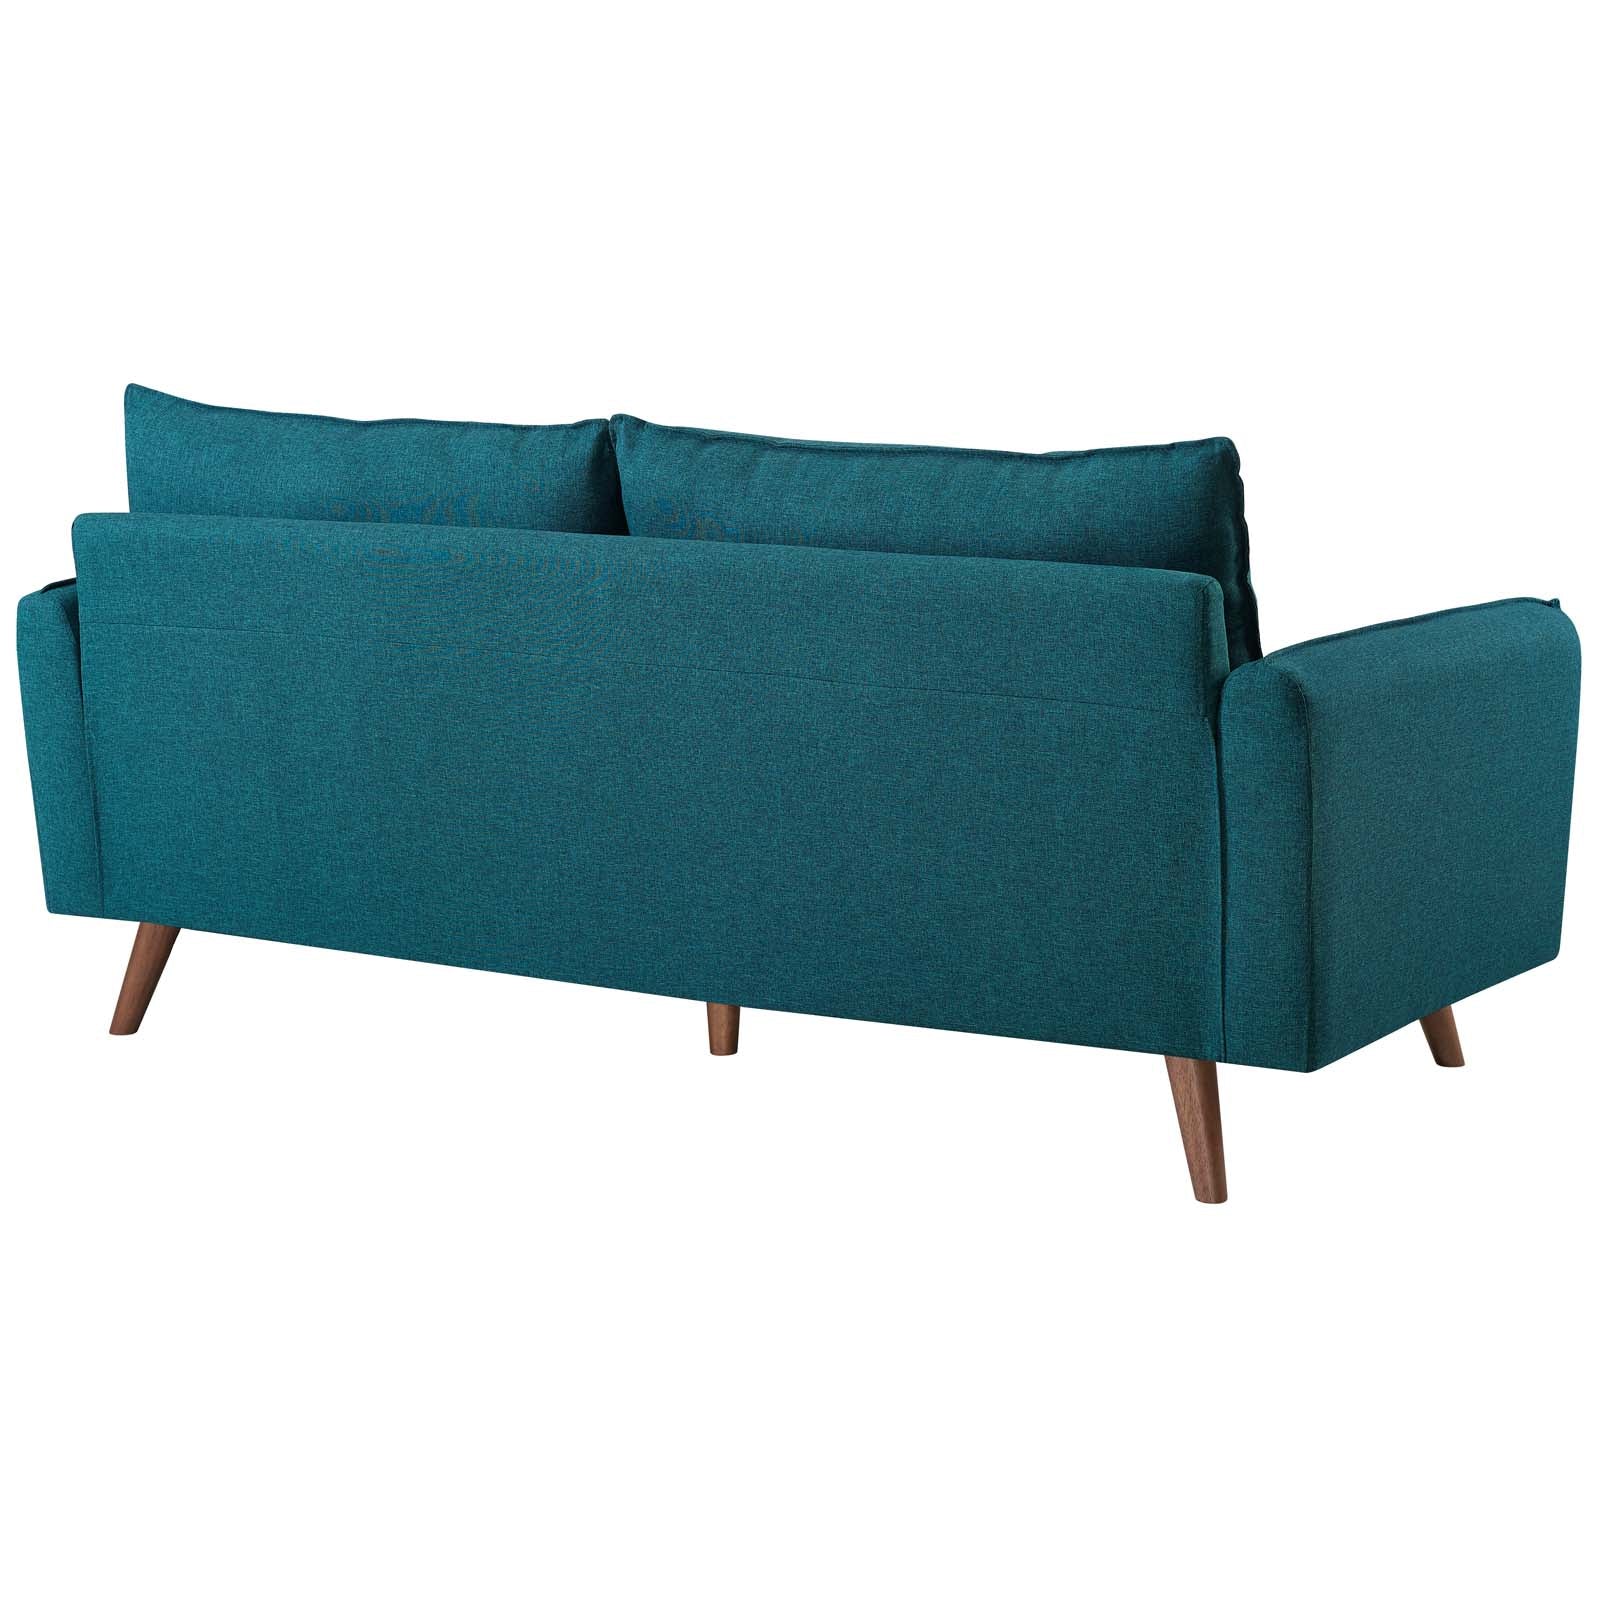 Revive Upholstered Fabric Sofa and Loveseat Set - East Shore Modern Home Furnishings